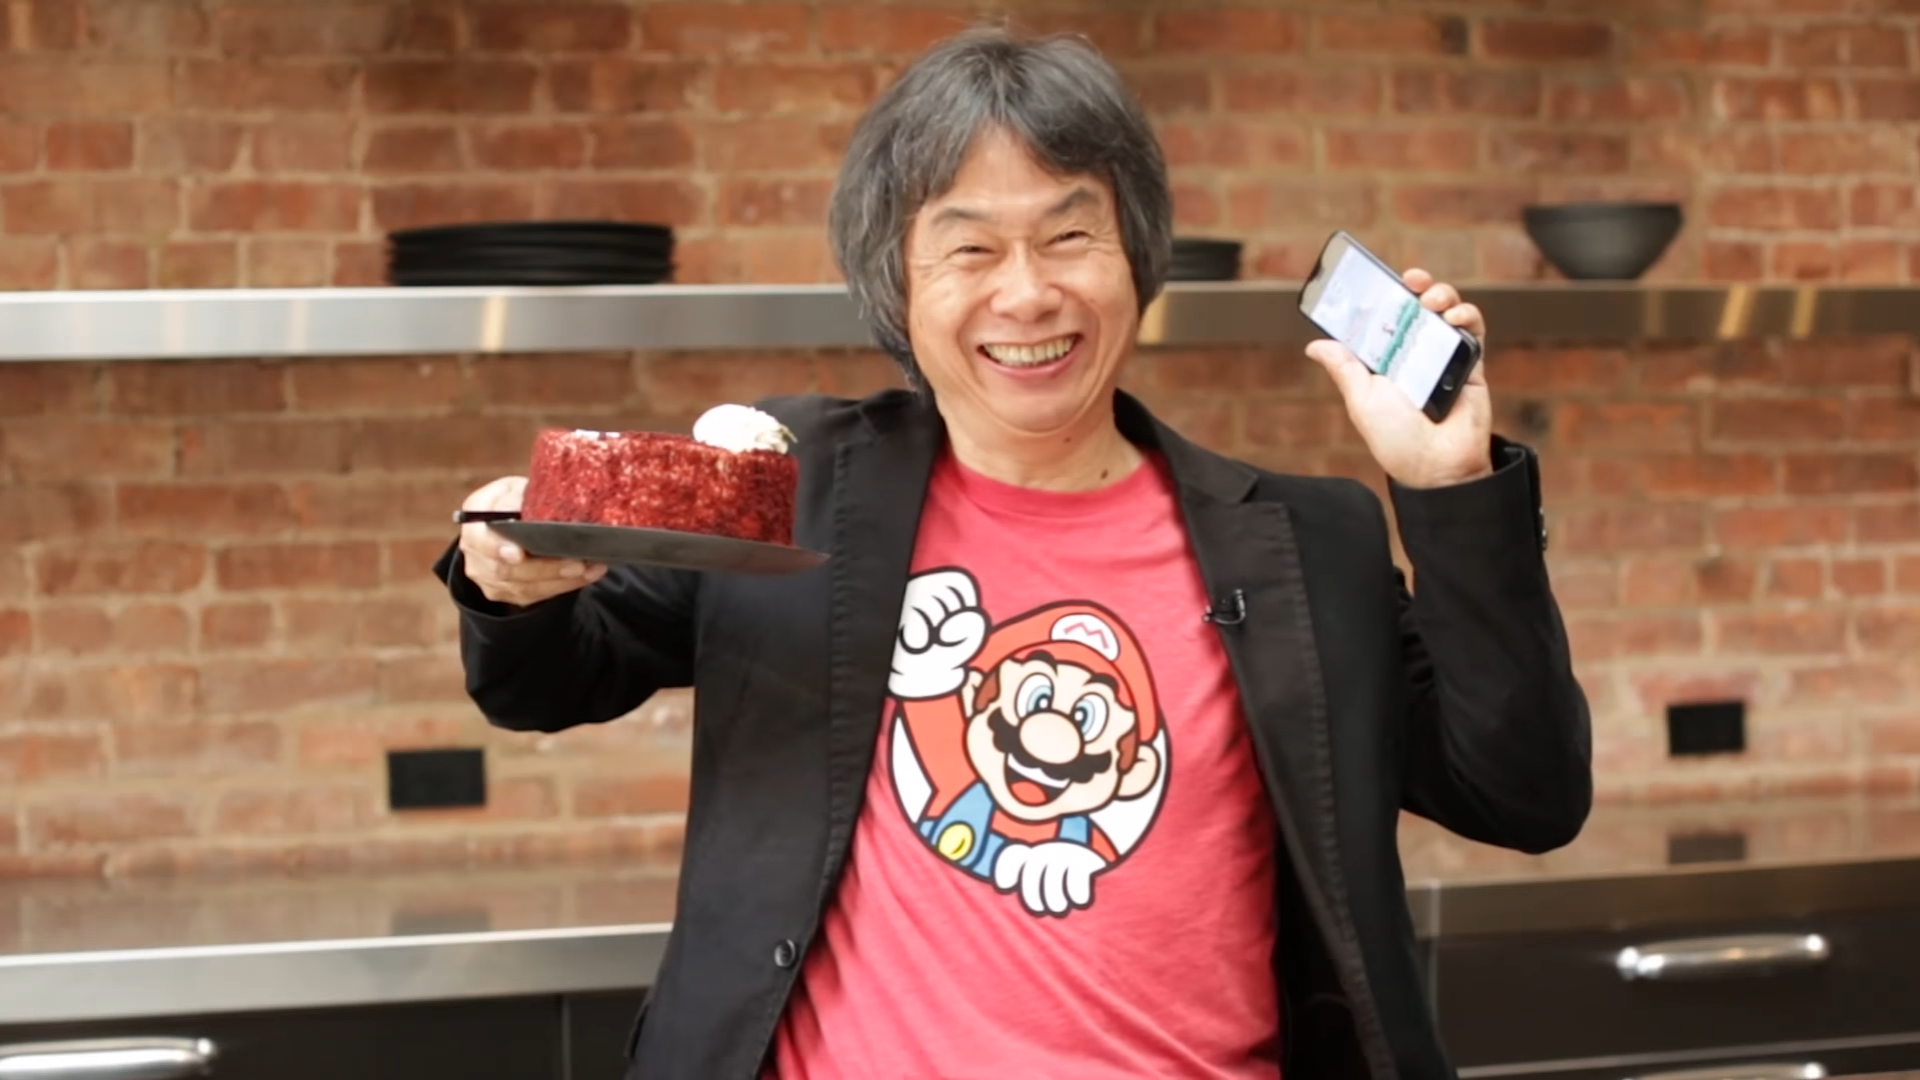 Image for Shigeru Miyamoto shows how easy it is to play Super Mario Run with one hand by scoffing down cake with the other